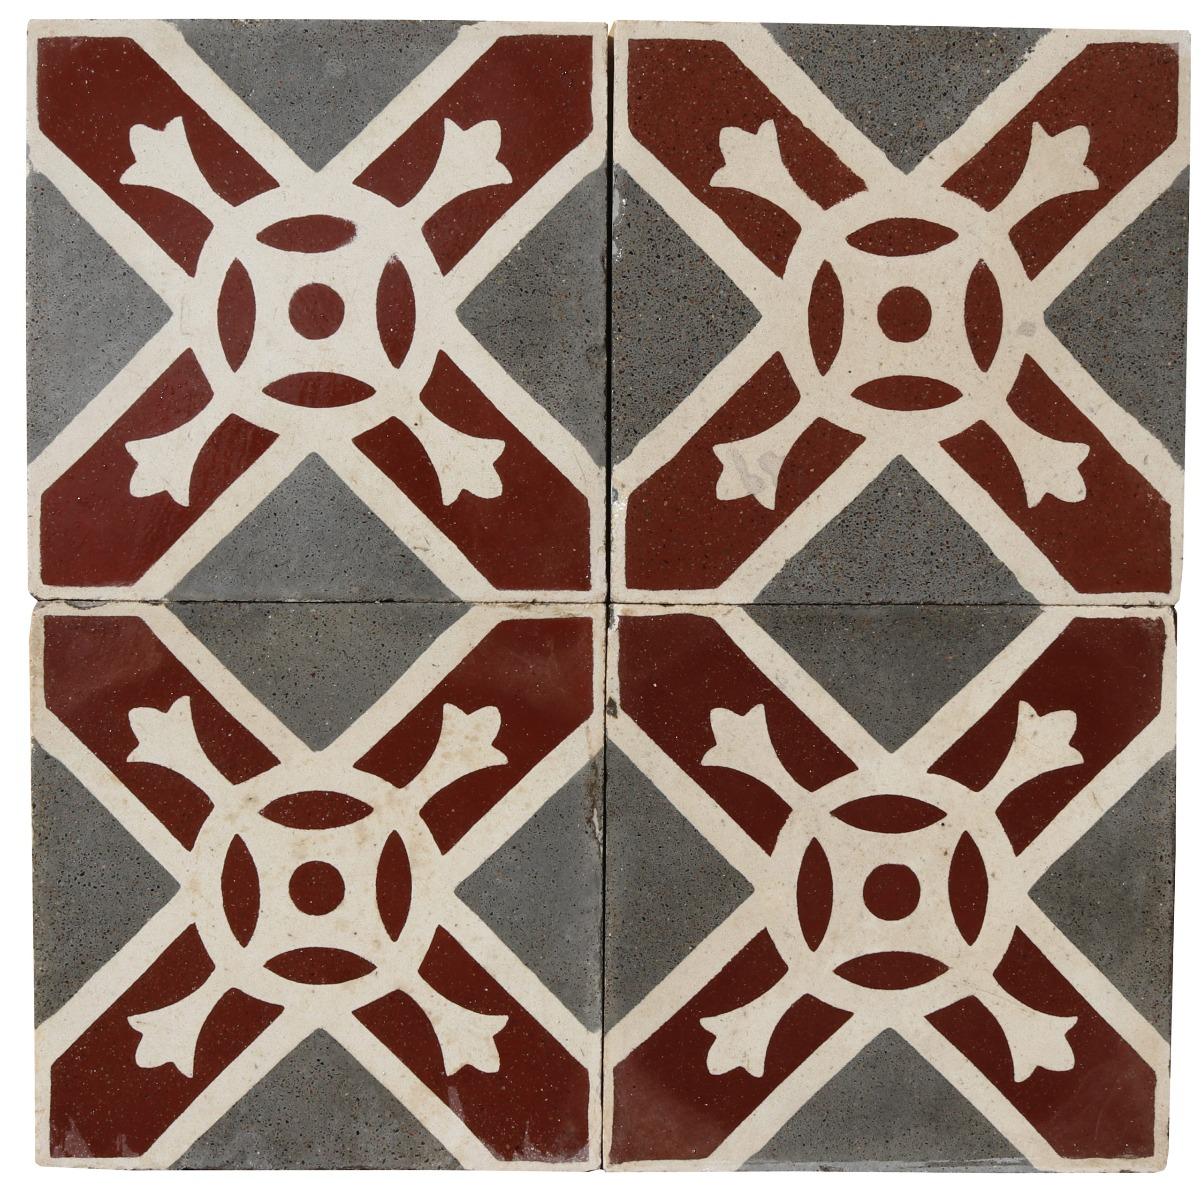 A set of 153 reclaimed encaustic cement tiles. These tiles will cover 6.12 m2 or 65 sq ft.